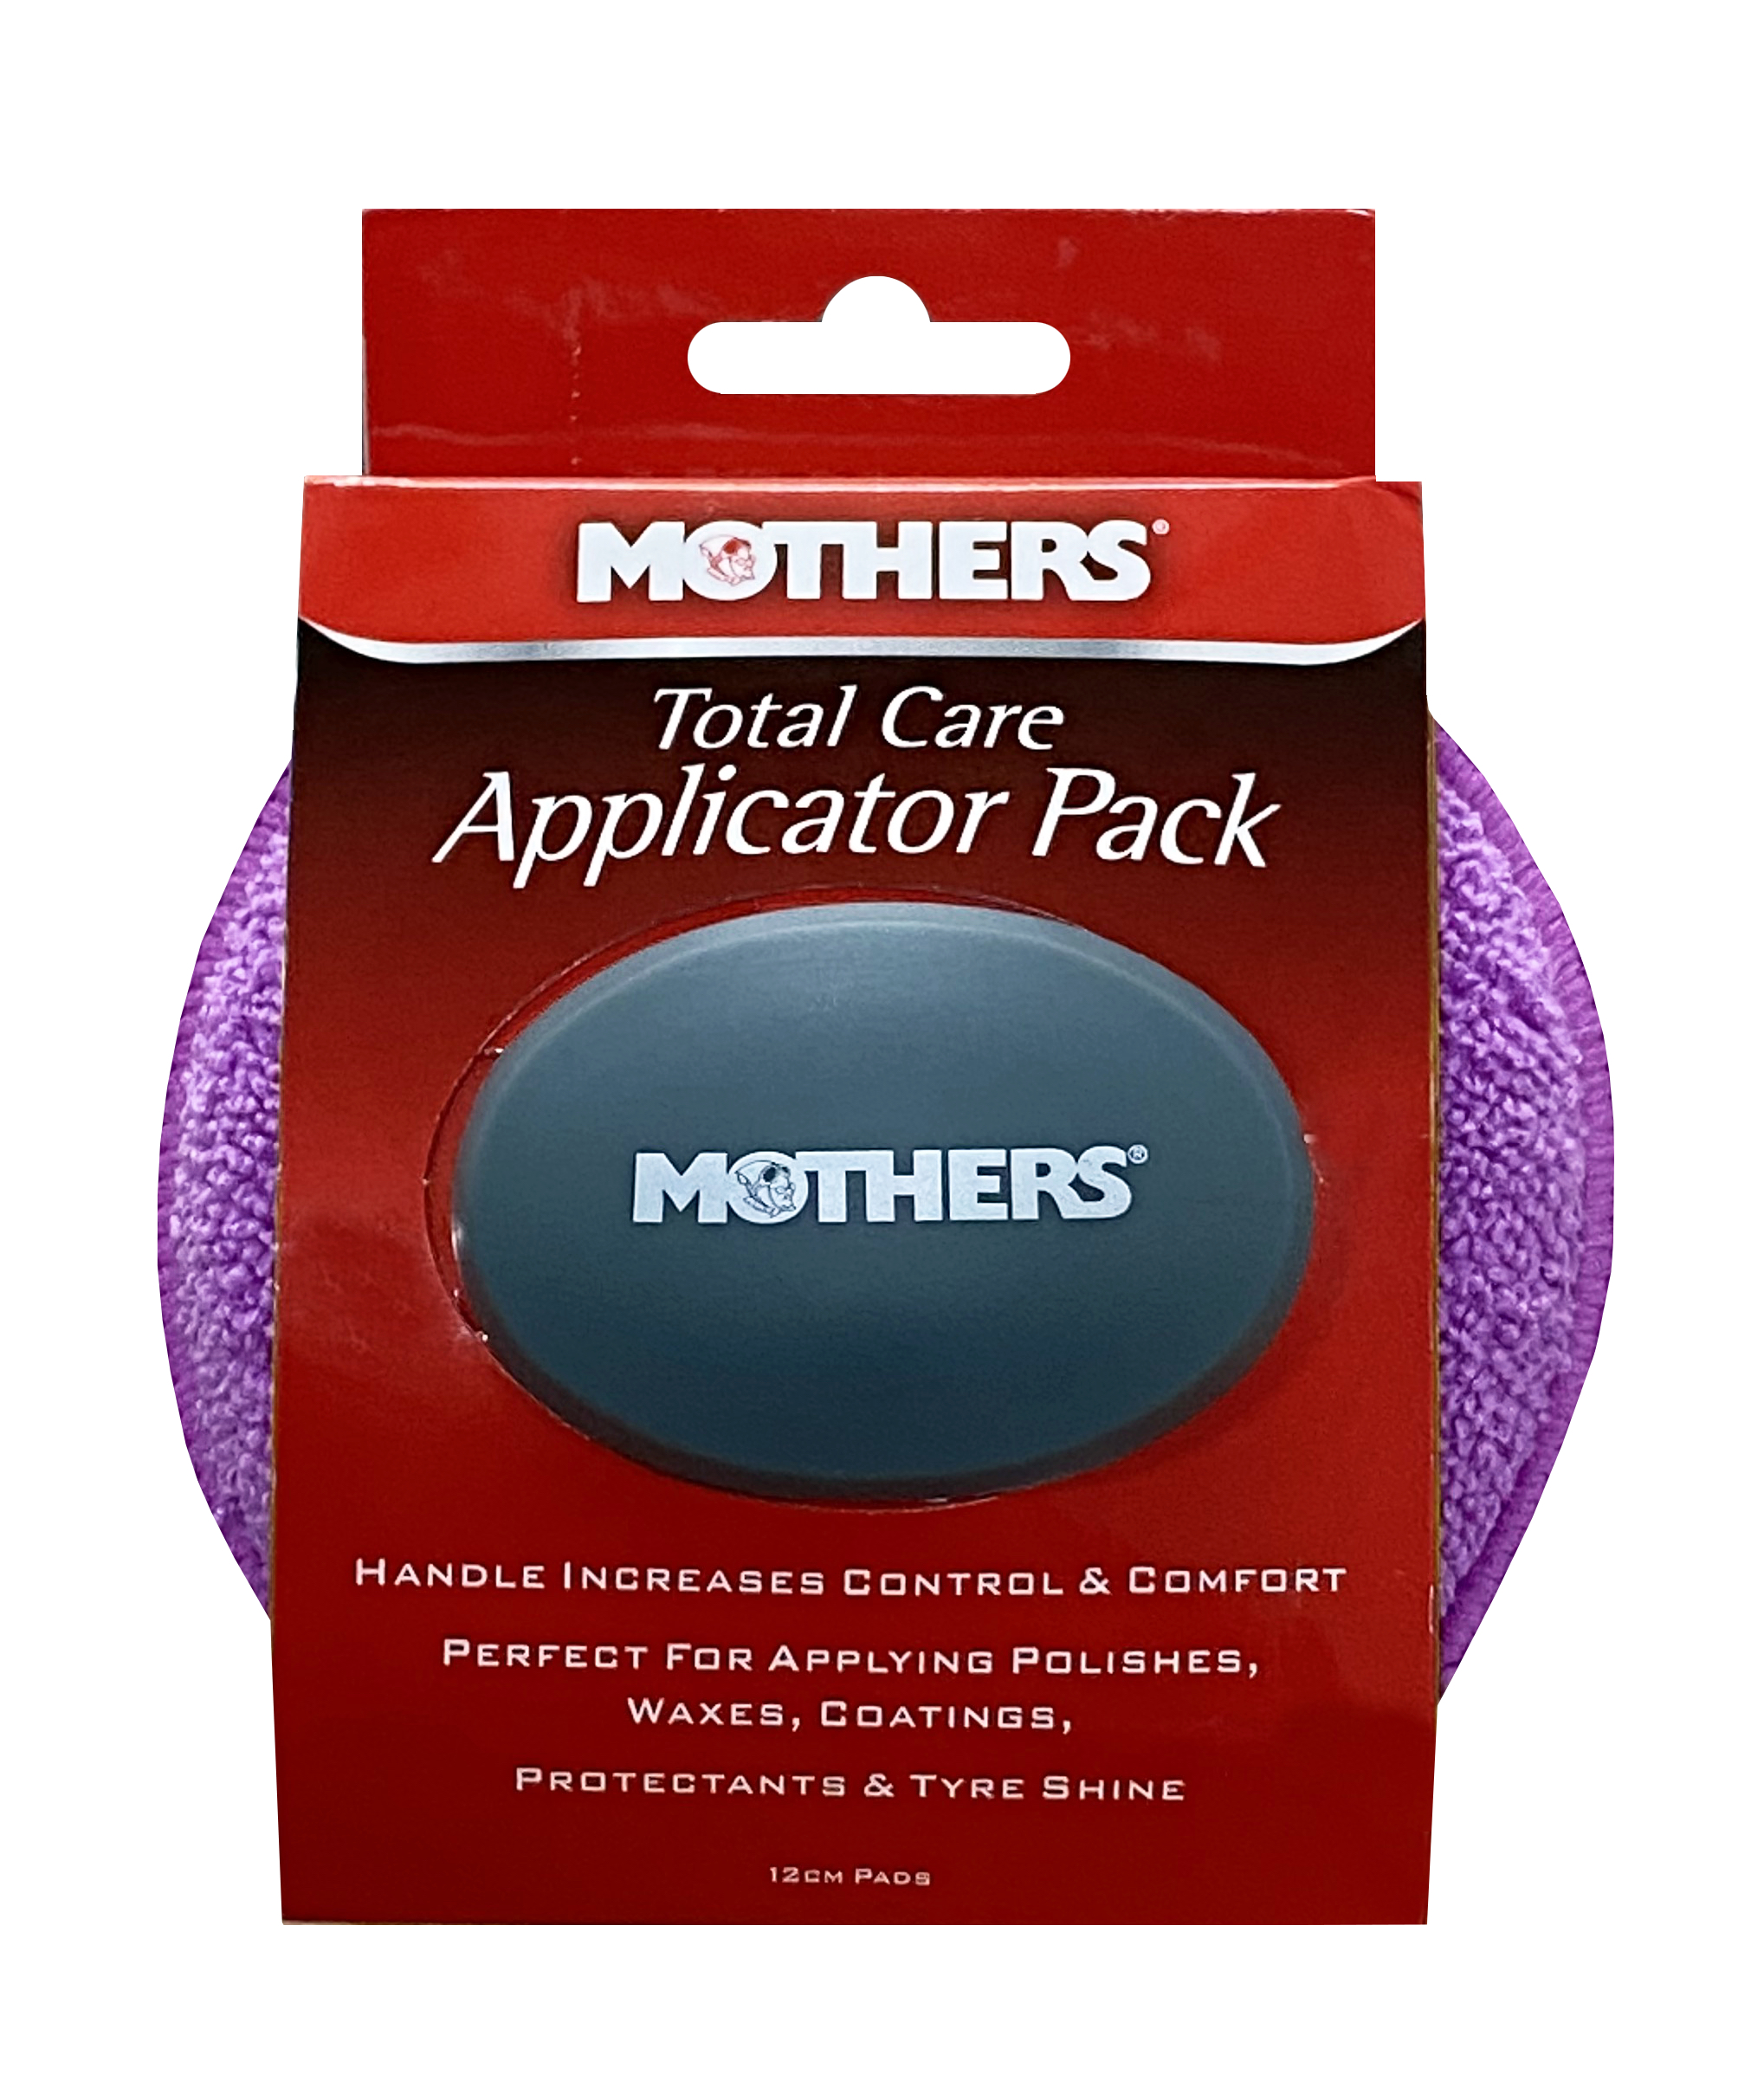 Mothers Total Care Applicator Pack